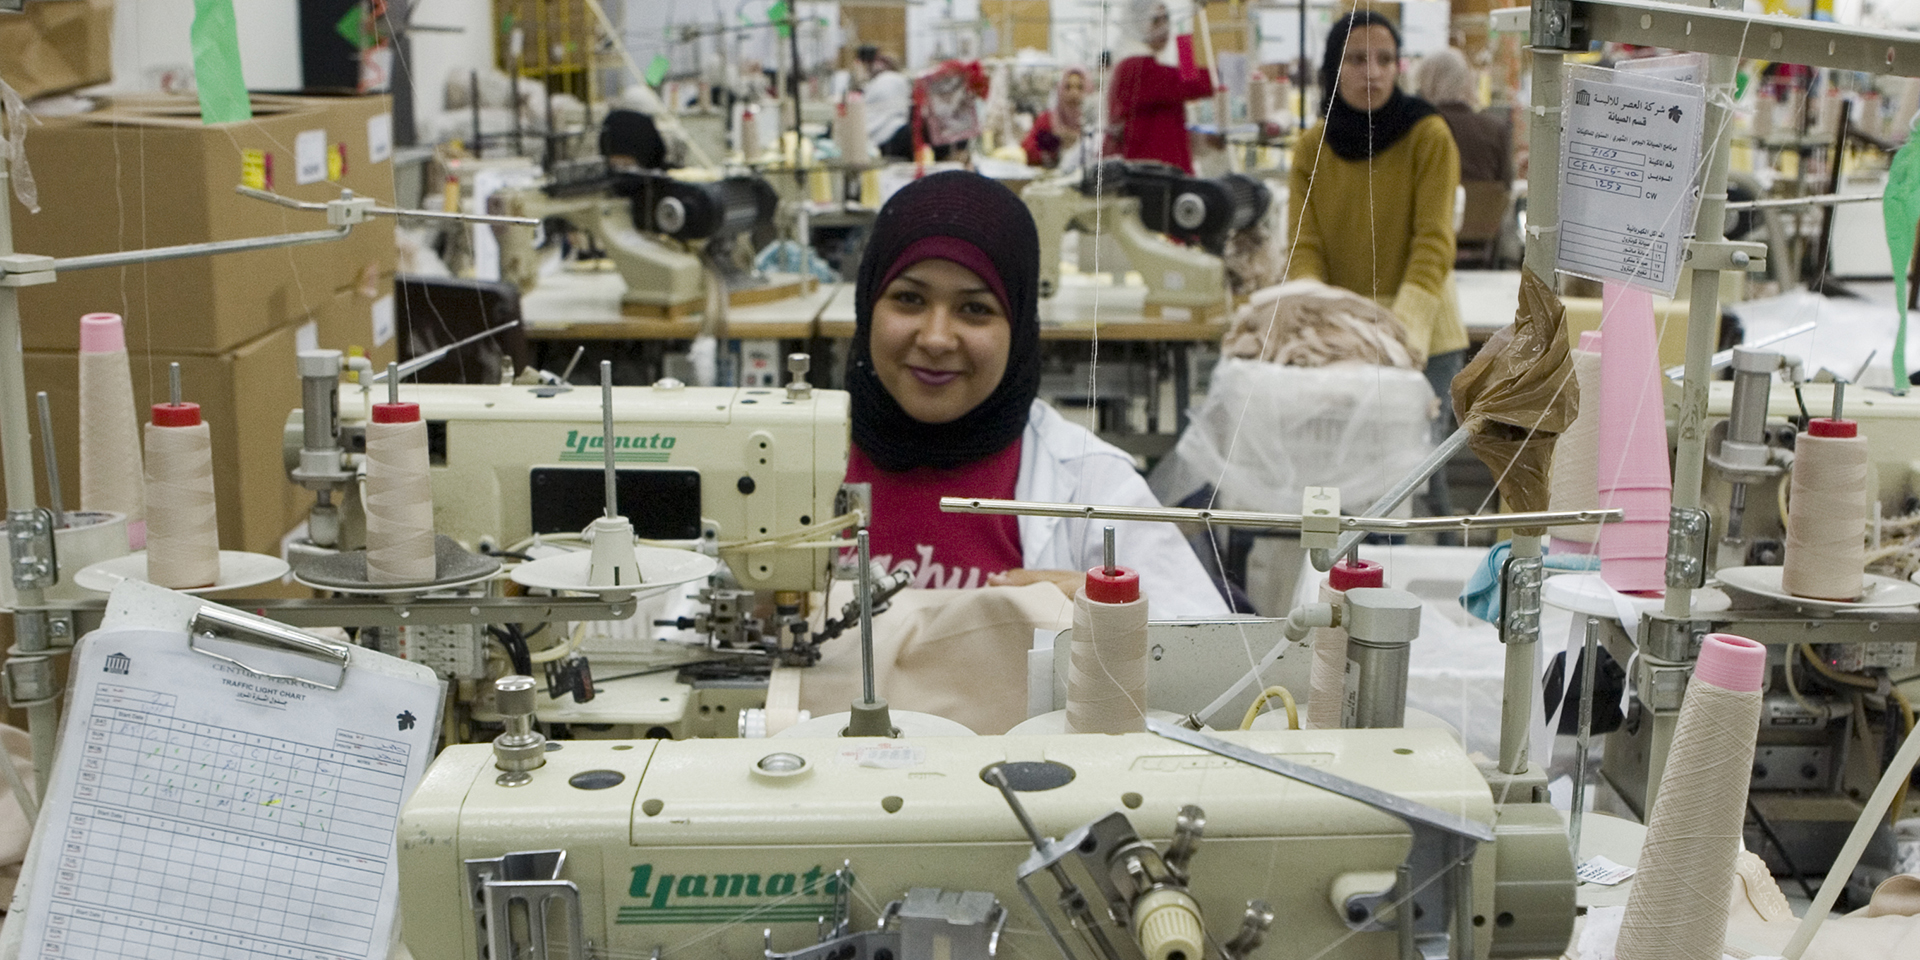 A woman smiles from behind a sewing machine at Century Wear Factory in Irbid, Jordan.